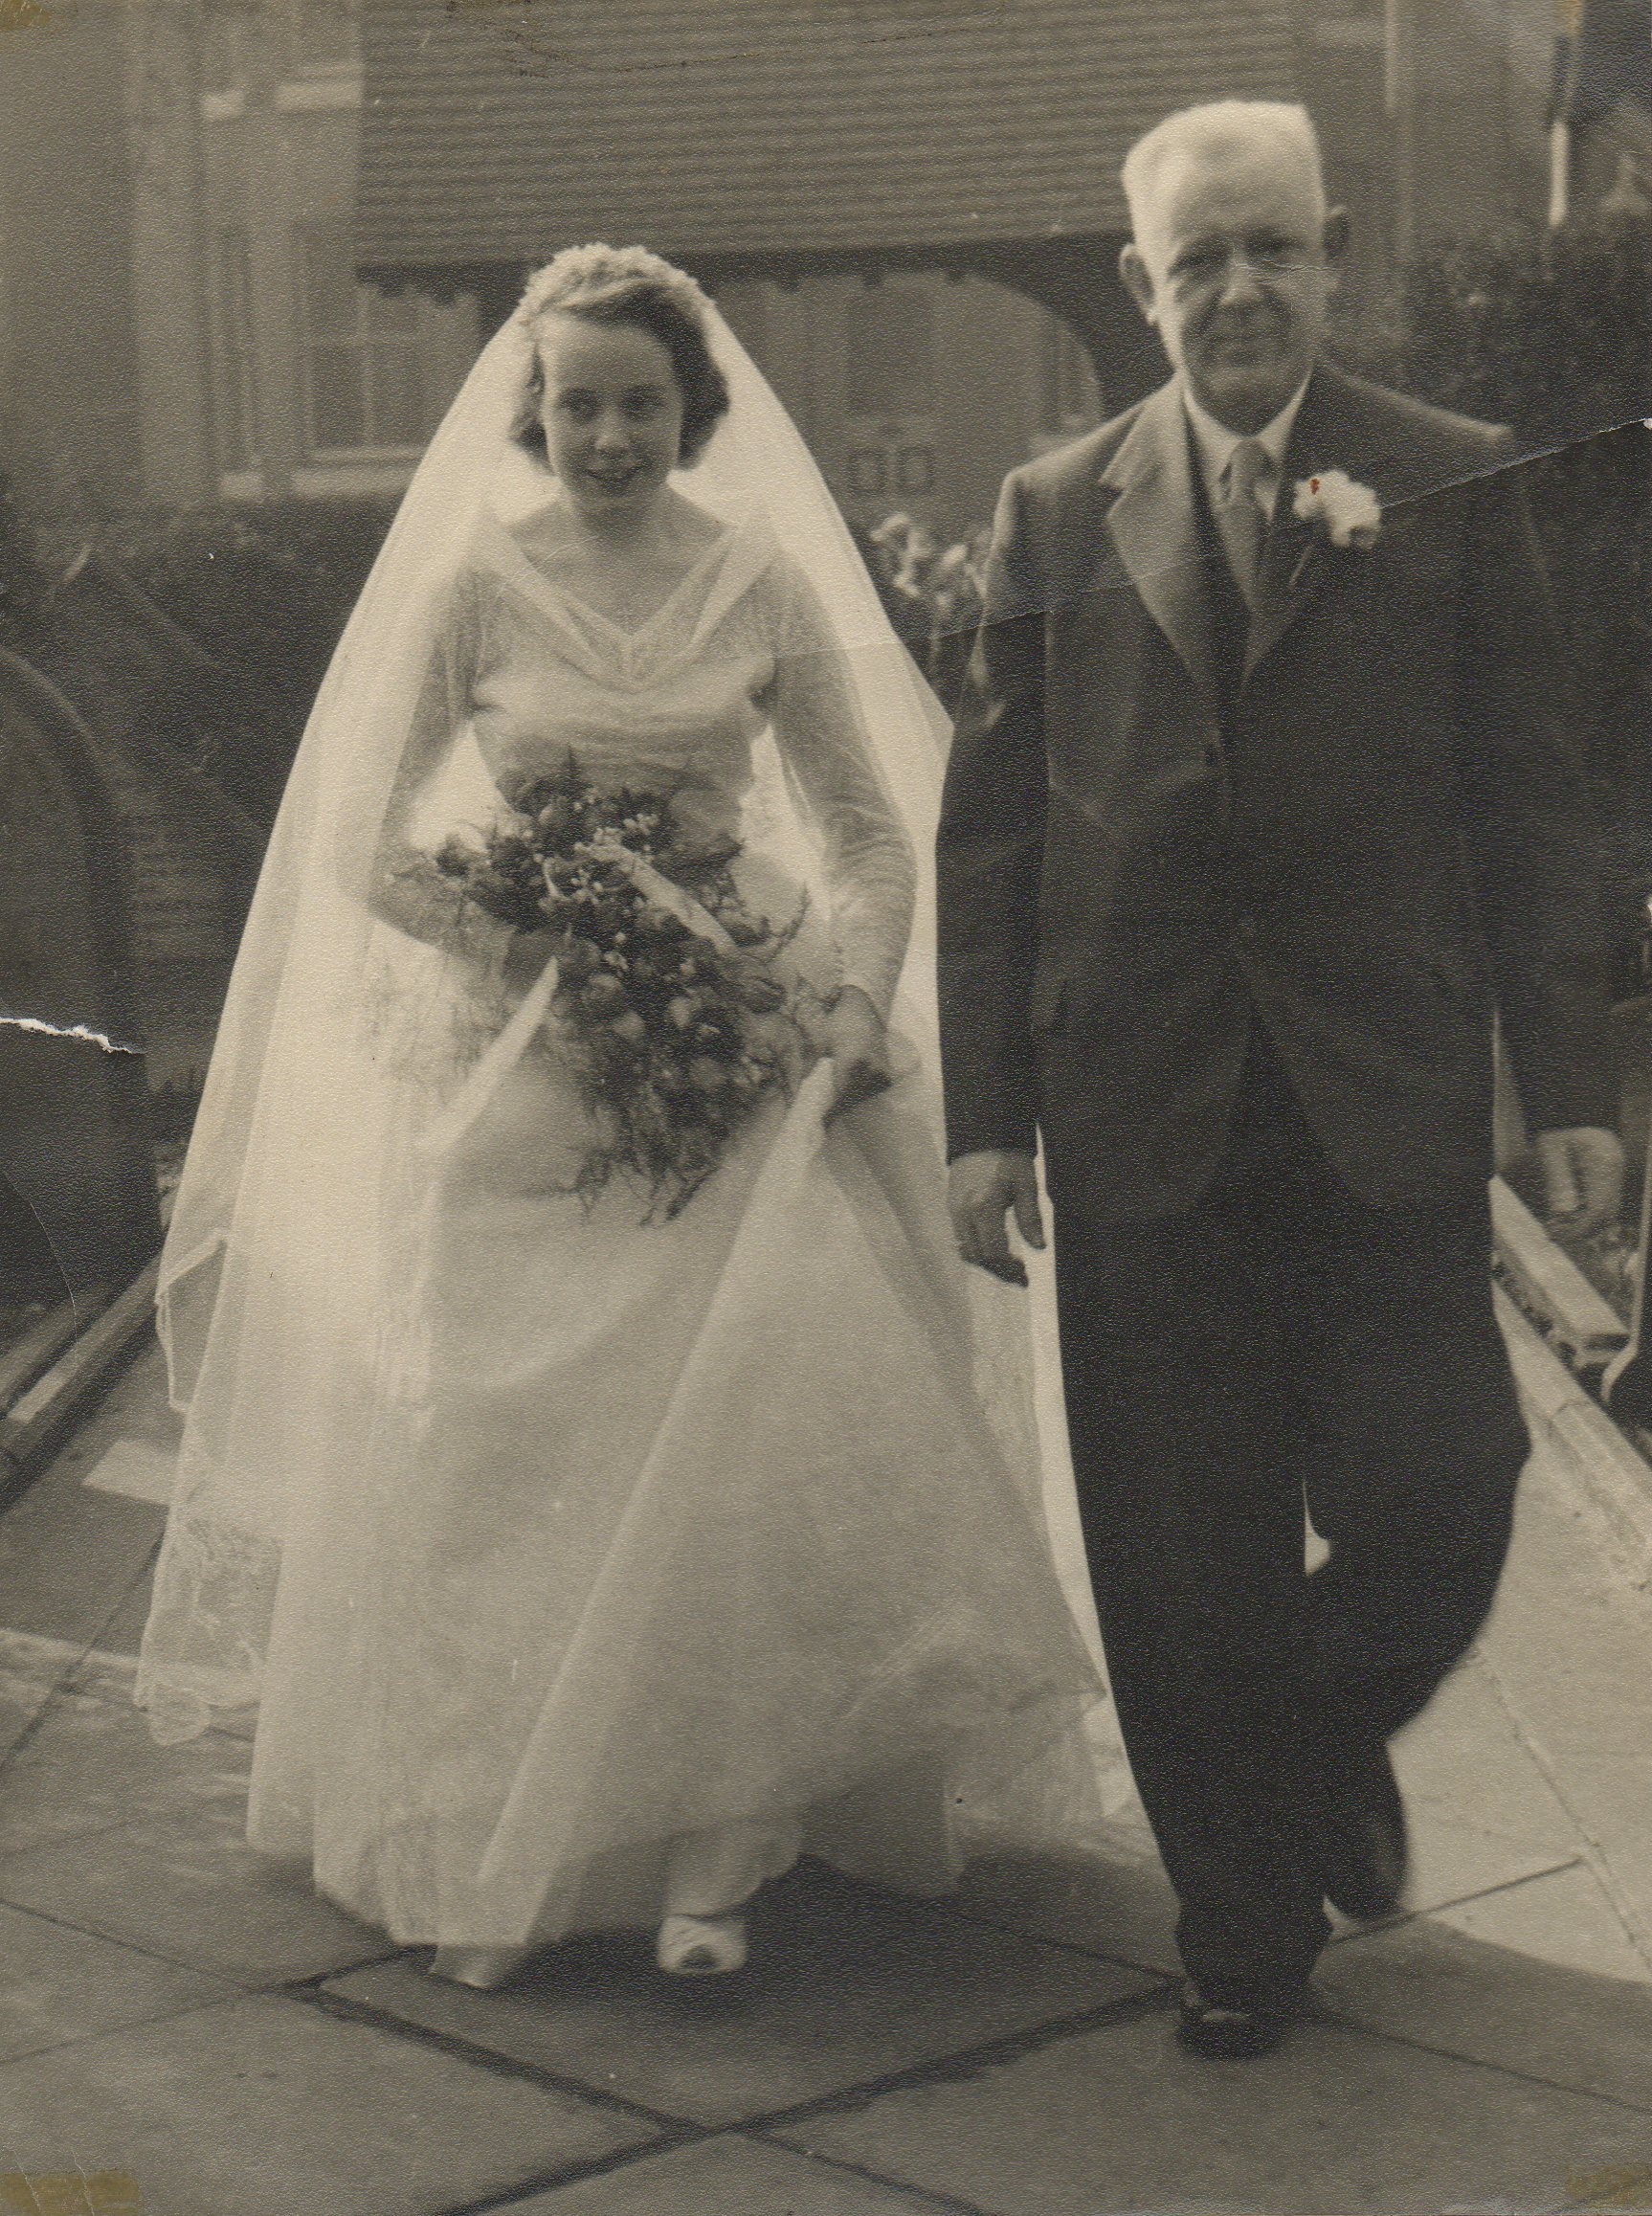 Brenda and Walter Brewer, 1955 England